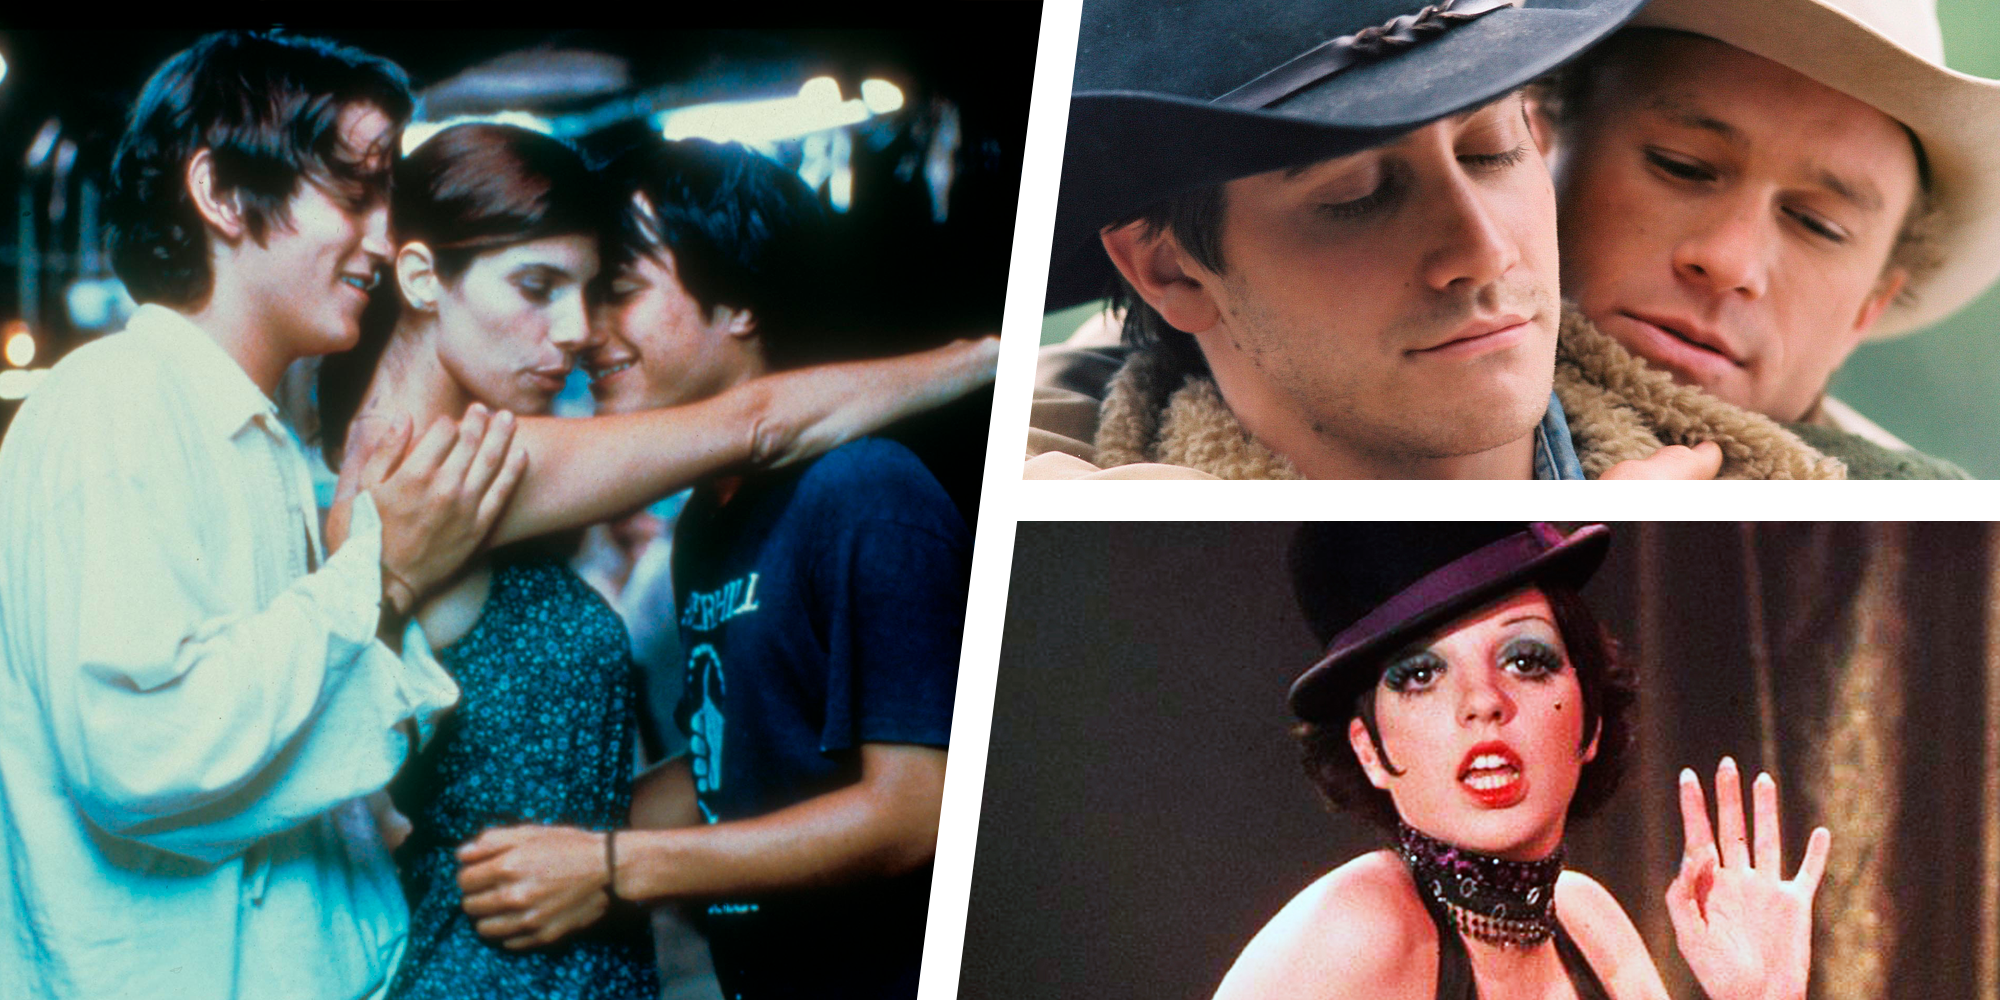 The 16 Best Bisexual Movies You Can Stream Right pic pic pic